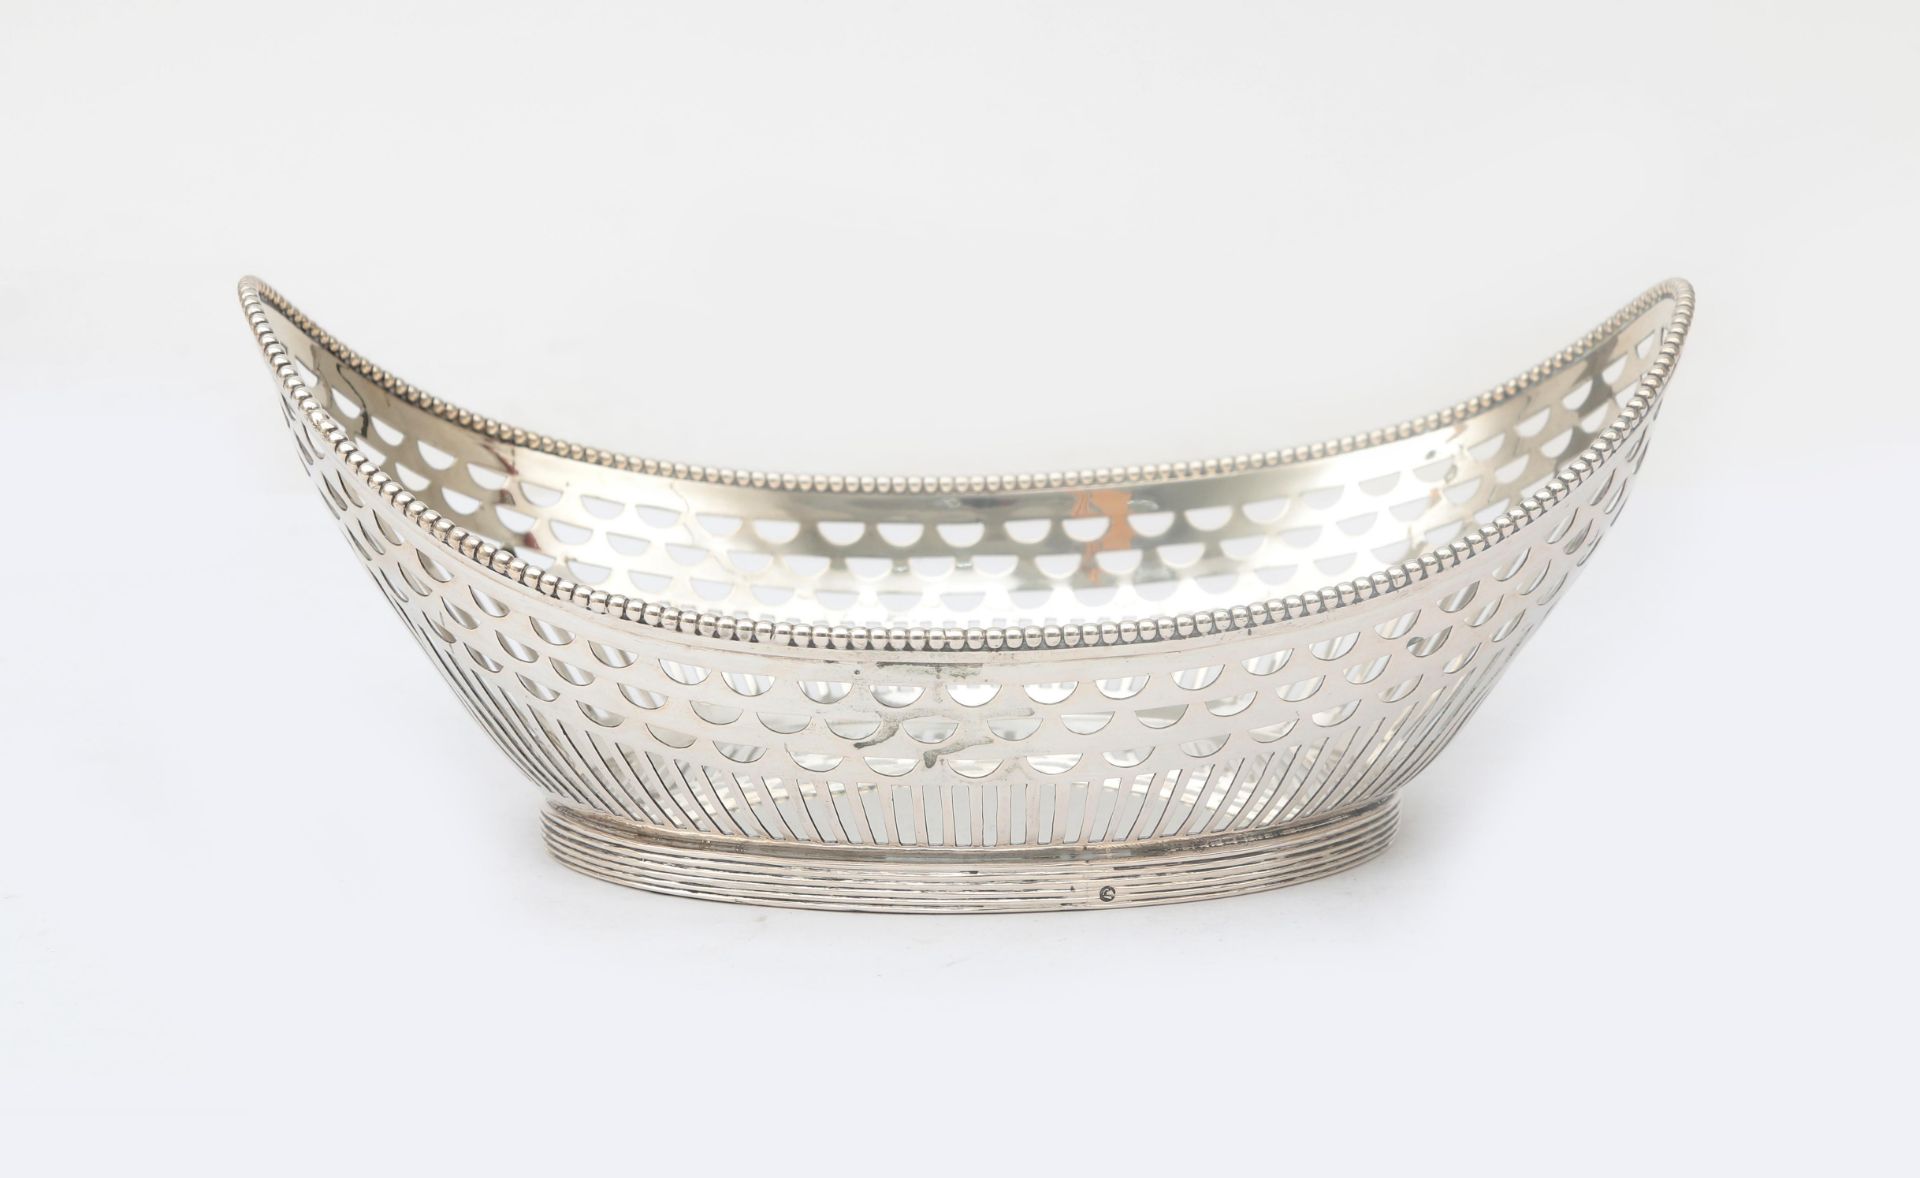 A Dutch ajour sawn 2nd grade silver bread basket with pearl rim on filleted stand ring. Masters